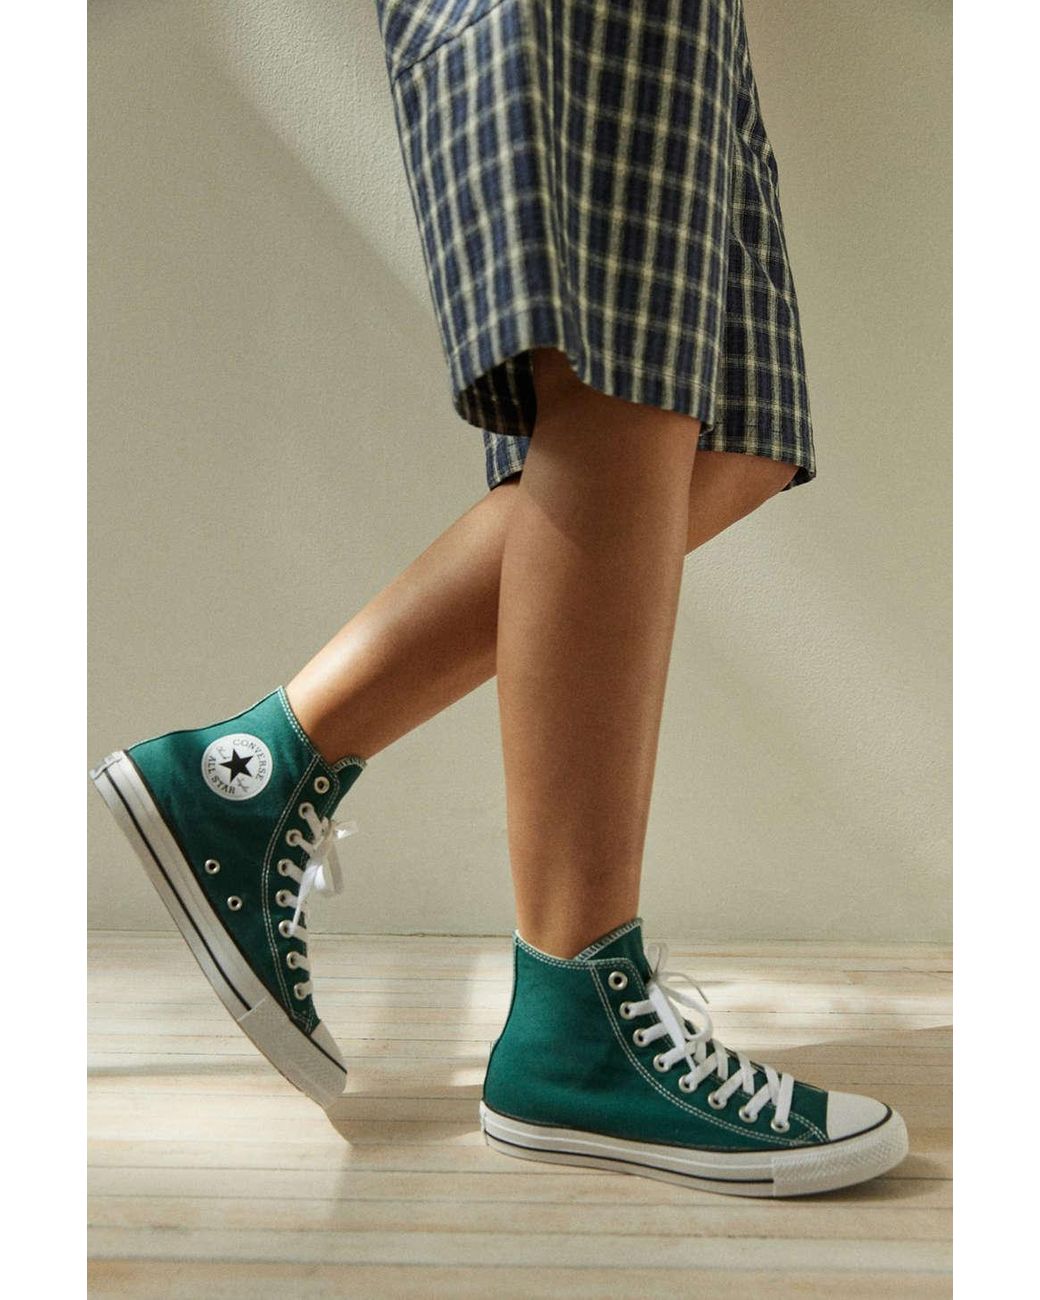 Converse Chuck Taylor All Star High Top Sneaker In Dragon Scale,at Urban  Outfitters in Green | Lyst